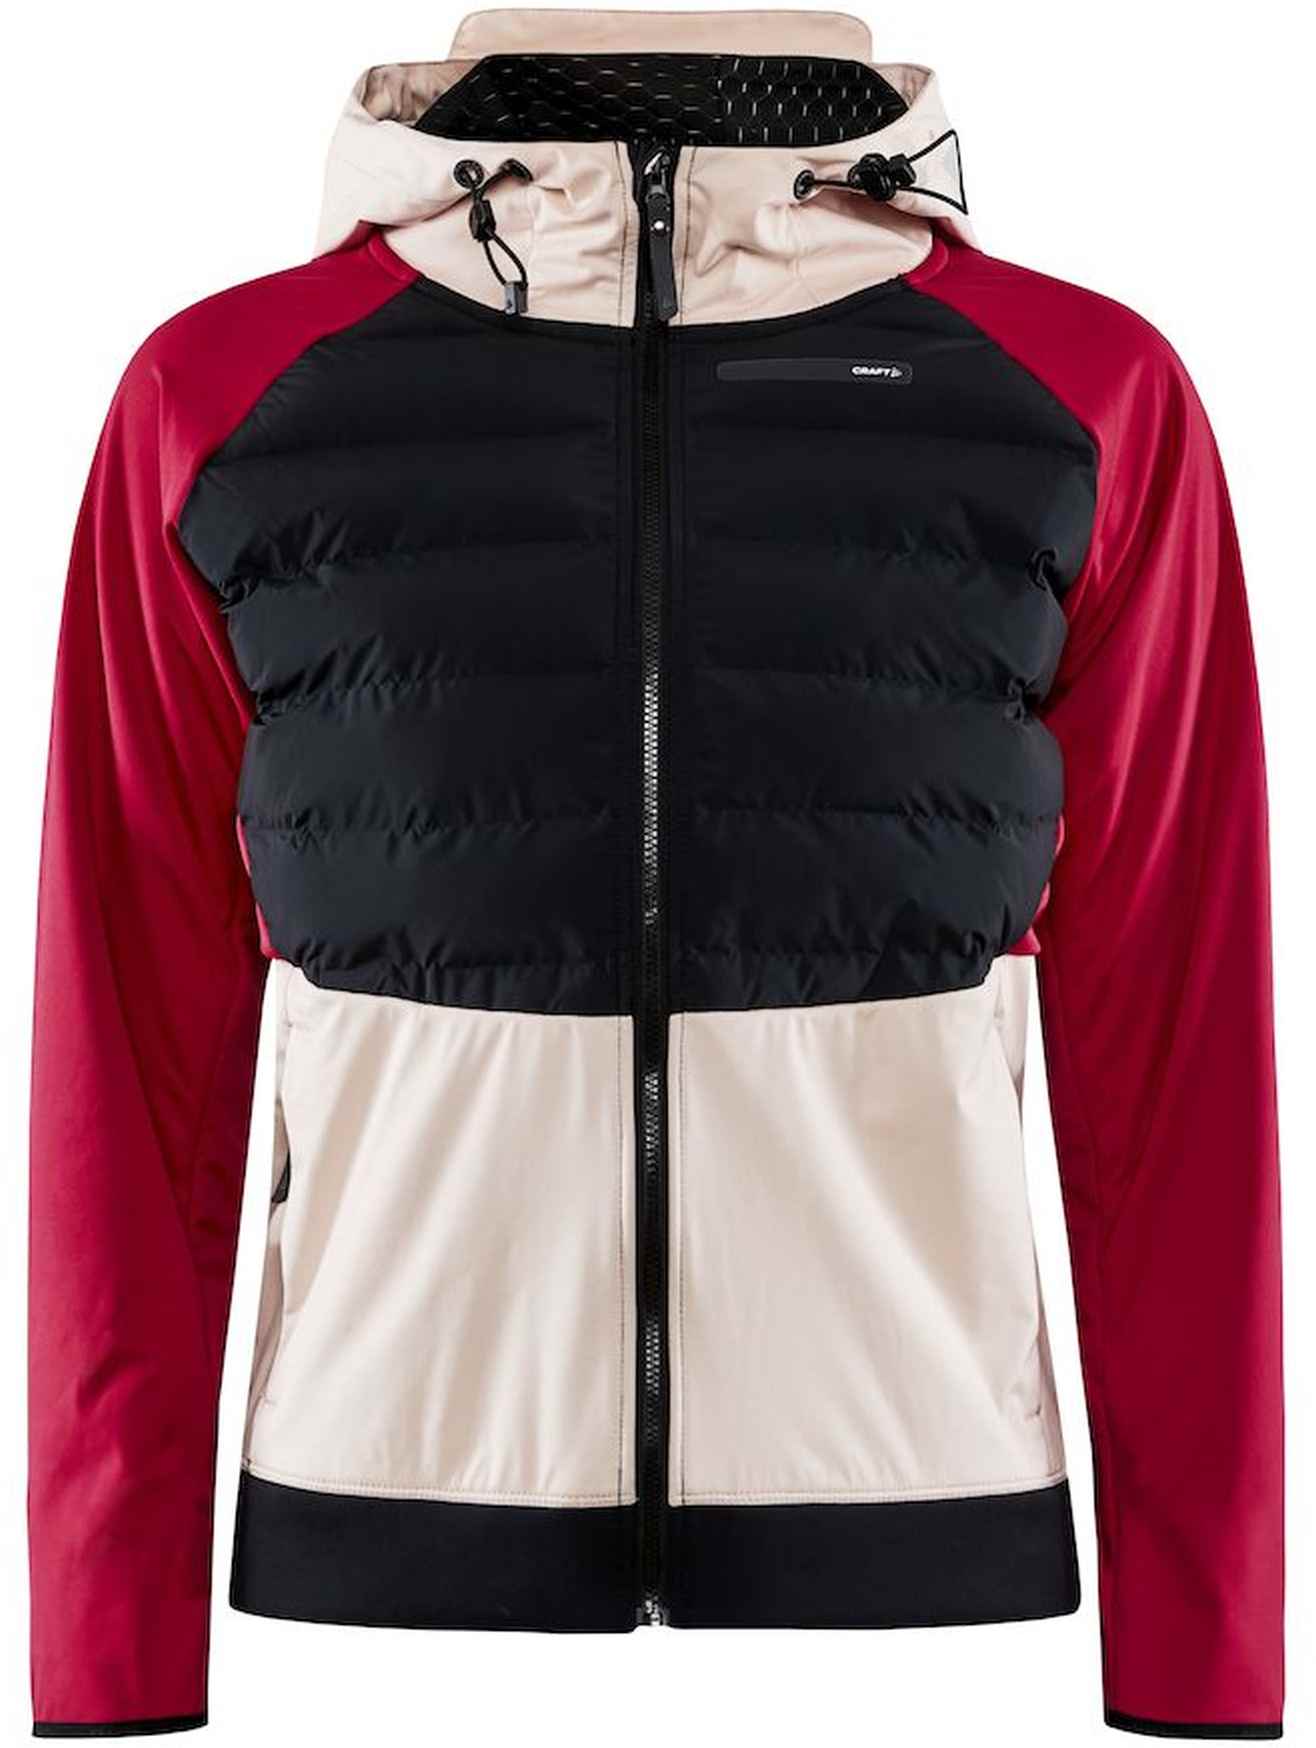 Women’s insulated jacket with a hood